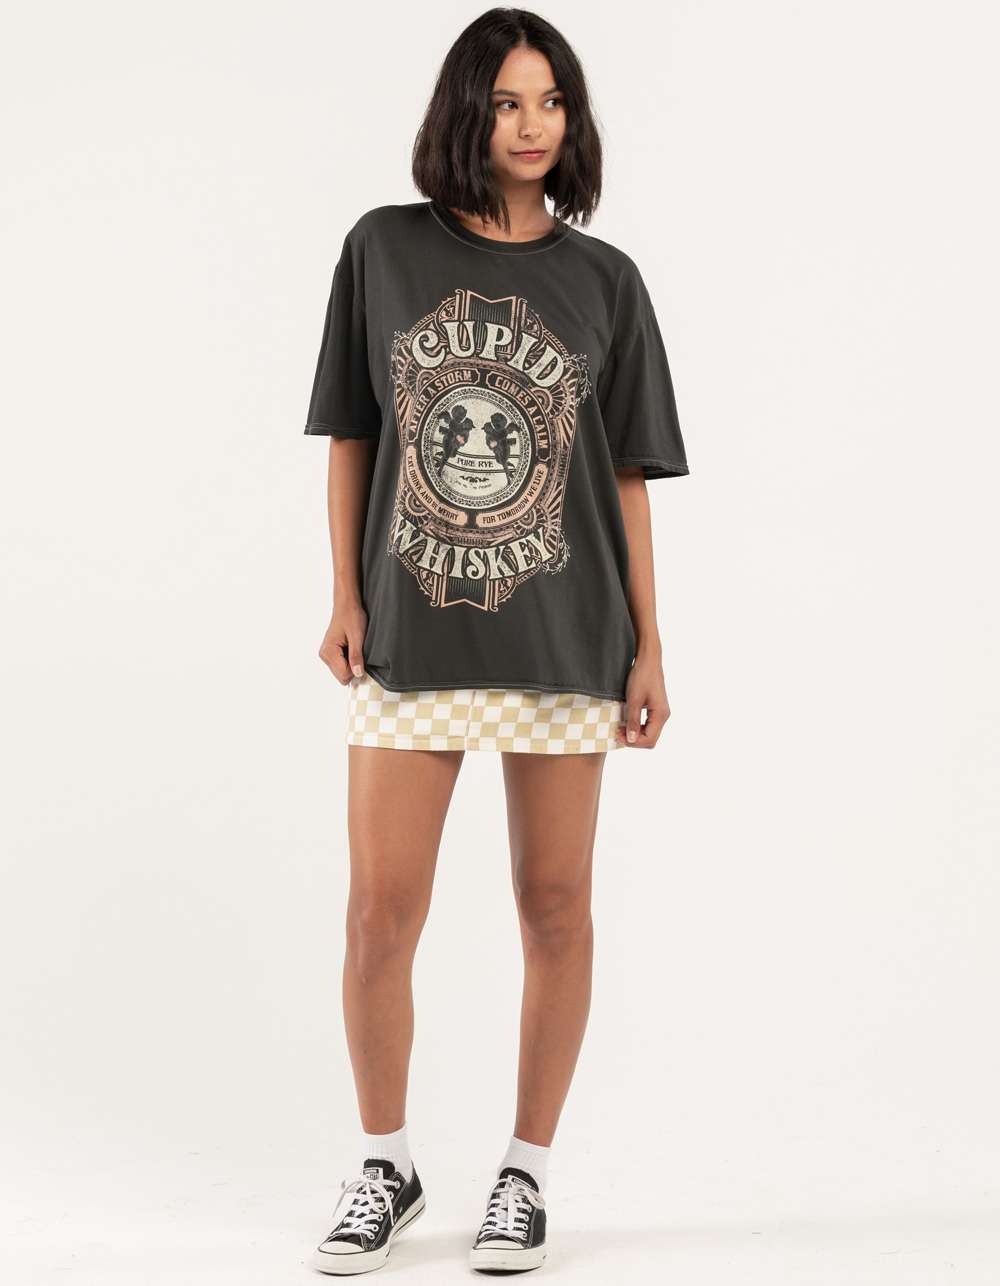 MY OVERSIZED GRAPHIC T-SHIRT COLLECTION  Tees Try-On (Urban Outfitters,  Project Social T + More) 